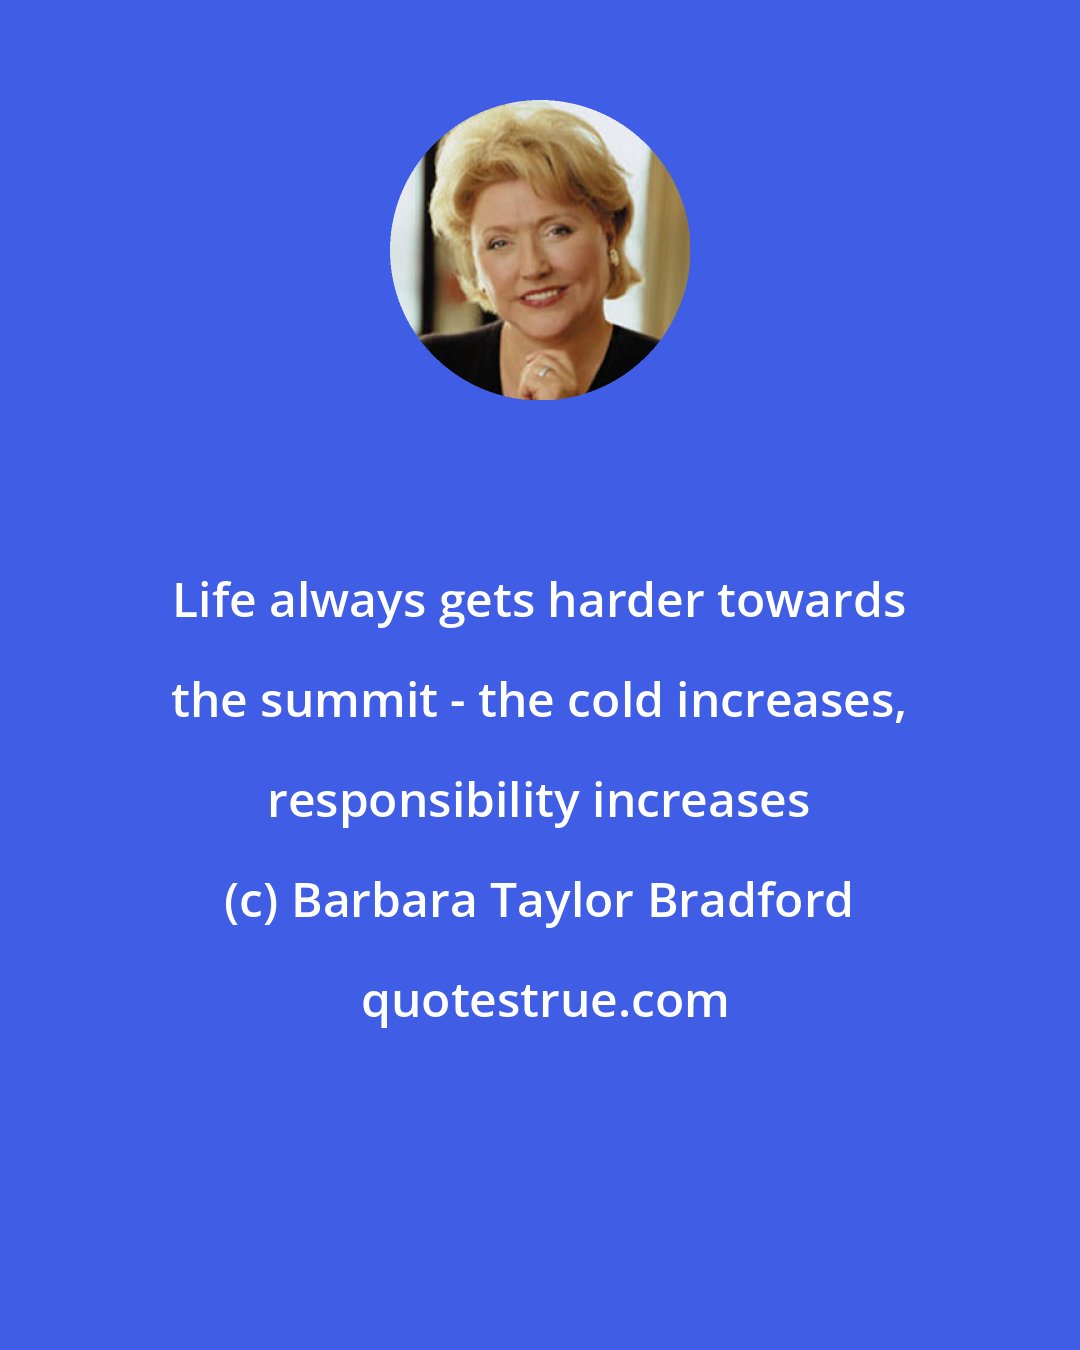 Barbara Taylor Bradford: Life always gets harder towards the summit - the cold increases, responsibility increases